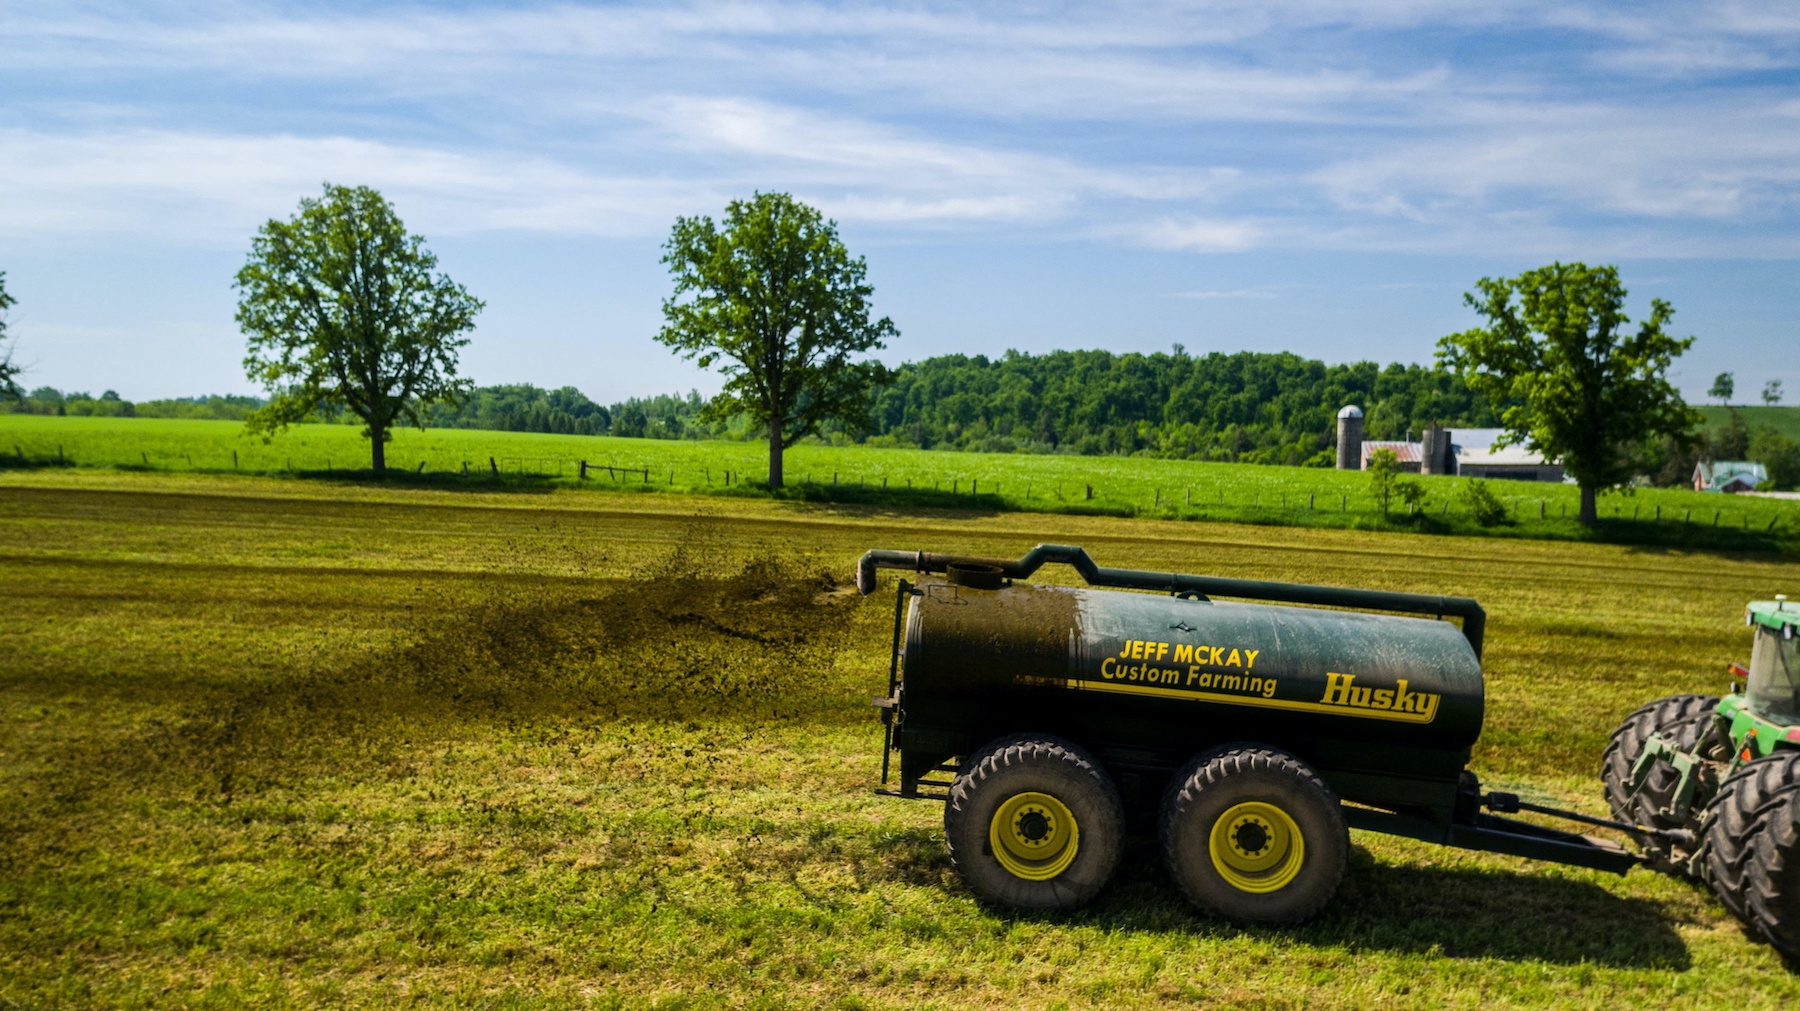 In the US, manure is ‘hot commodity’ amid commercial fertilizer shortage